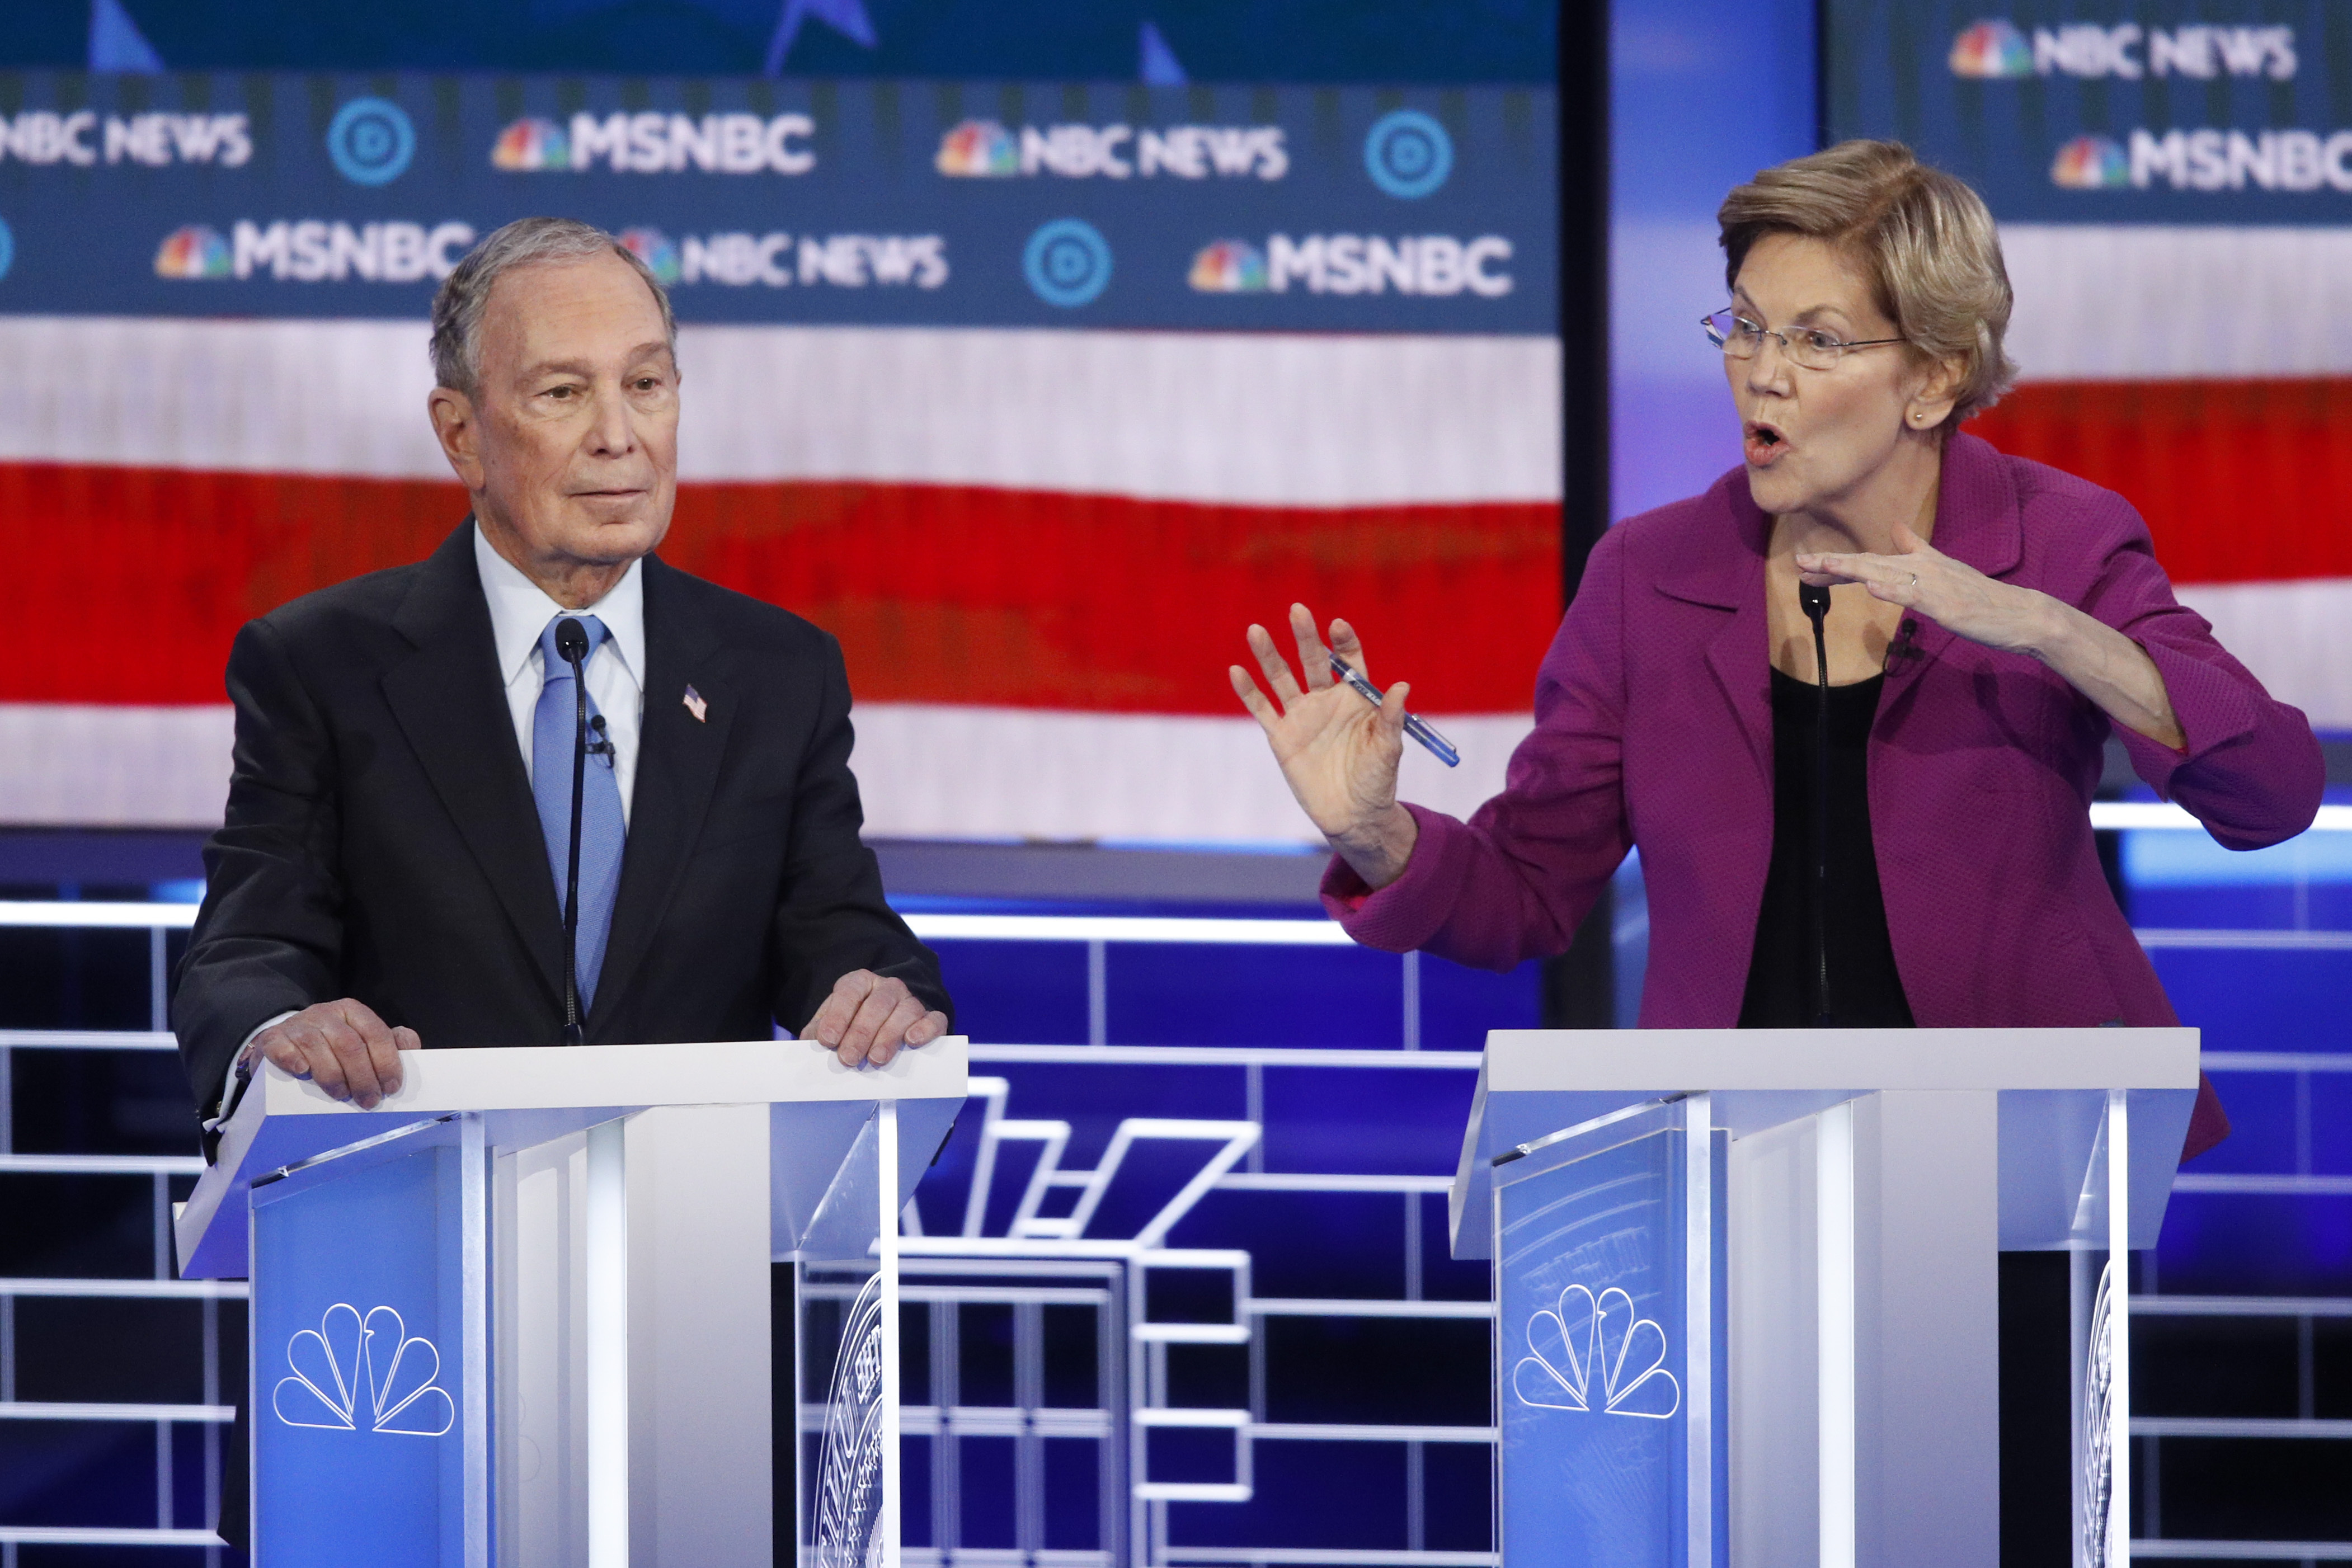 READ: O'Reilly's No Spin Analysis of Bloomberg's First Democratic Debate